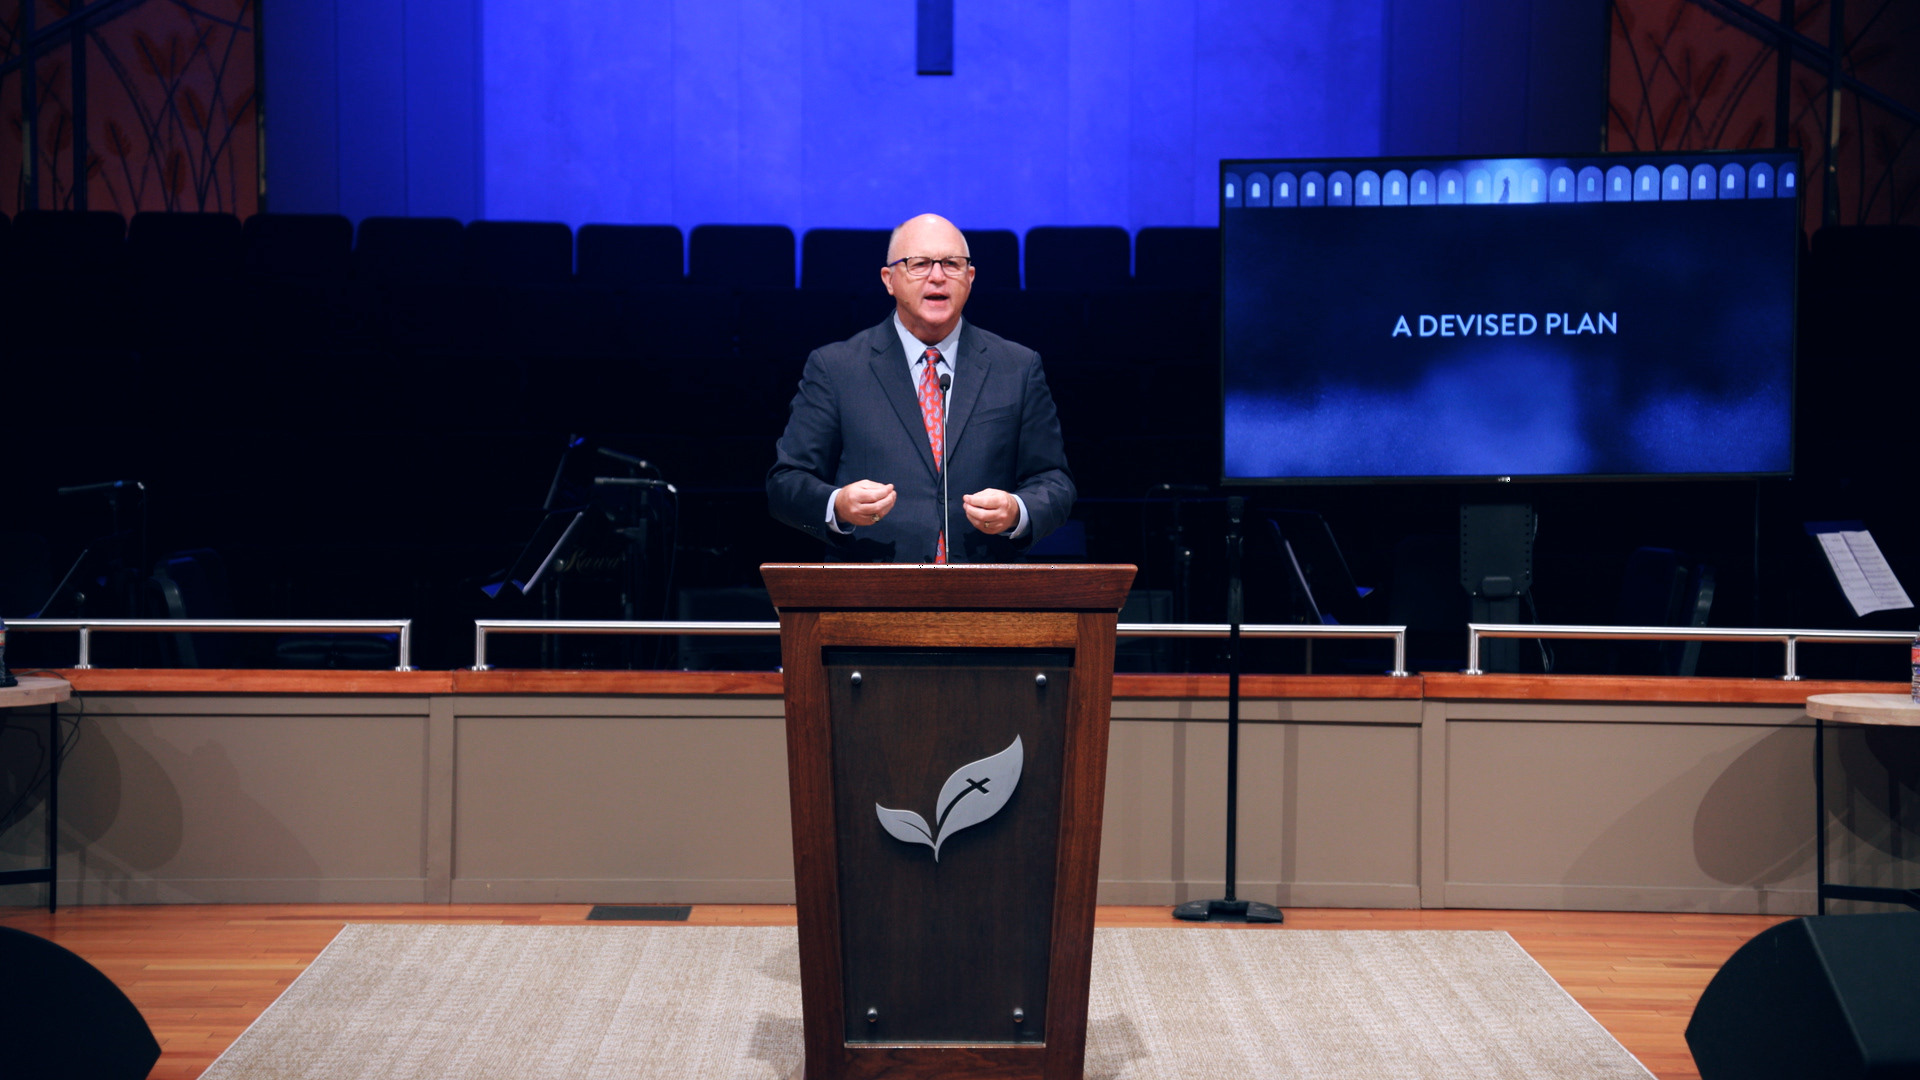 Pastor Paul Chappell: The Unseen Director